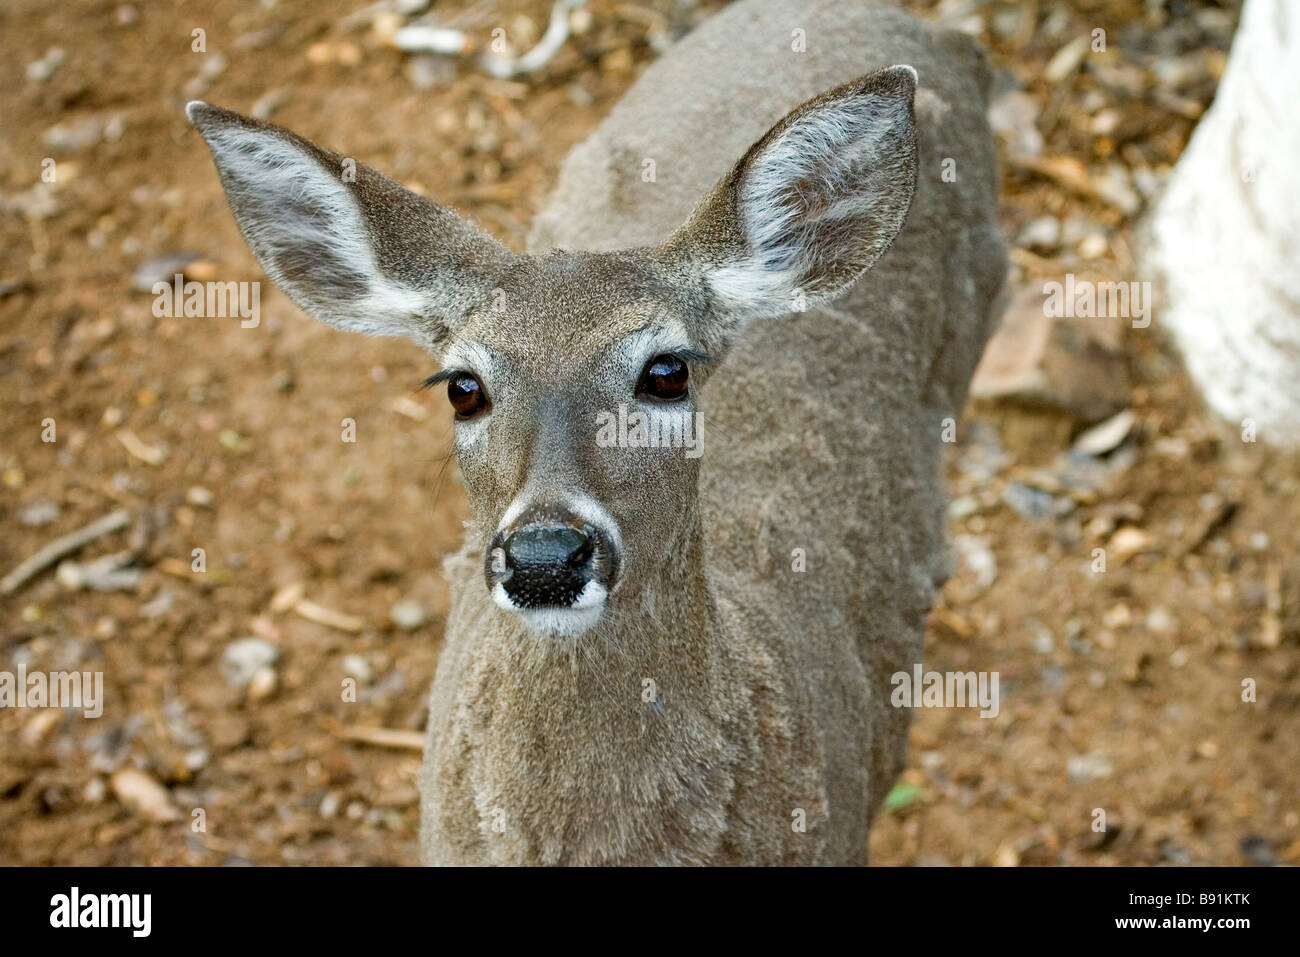 White-Tailed Deer Foto Stock